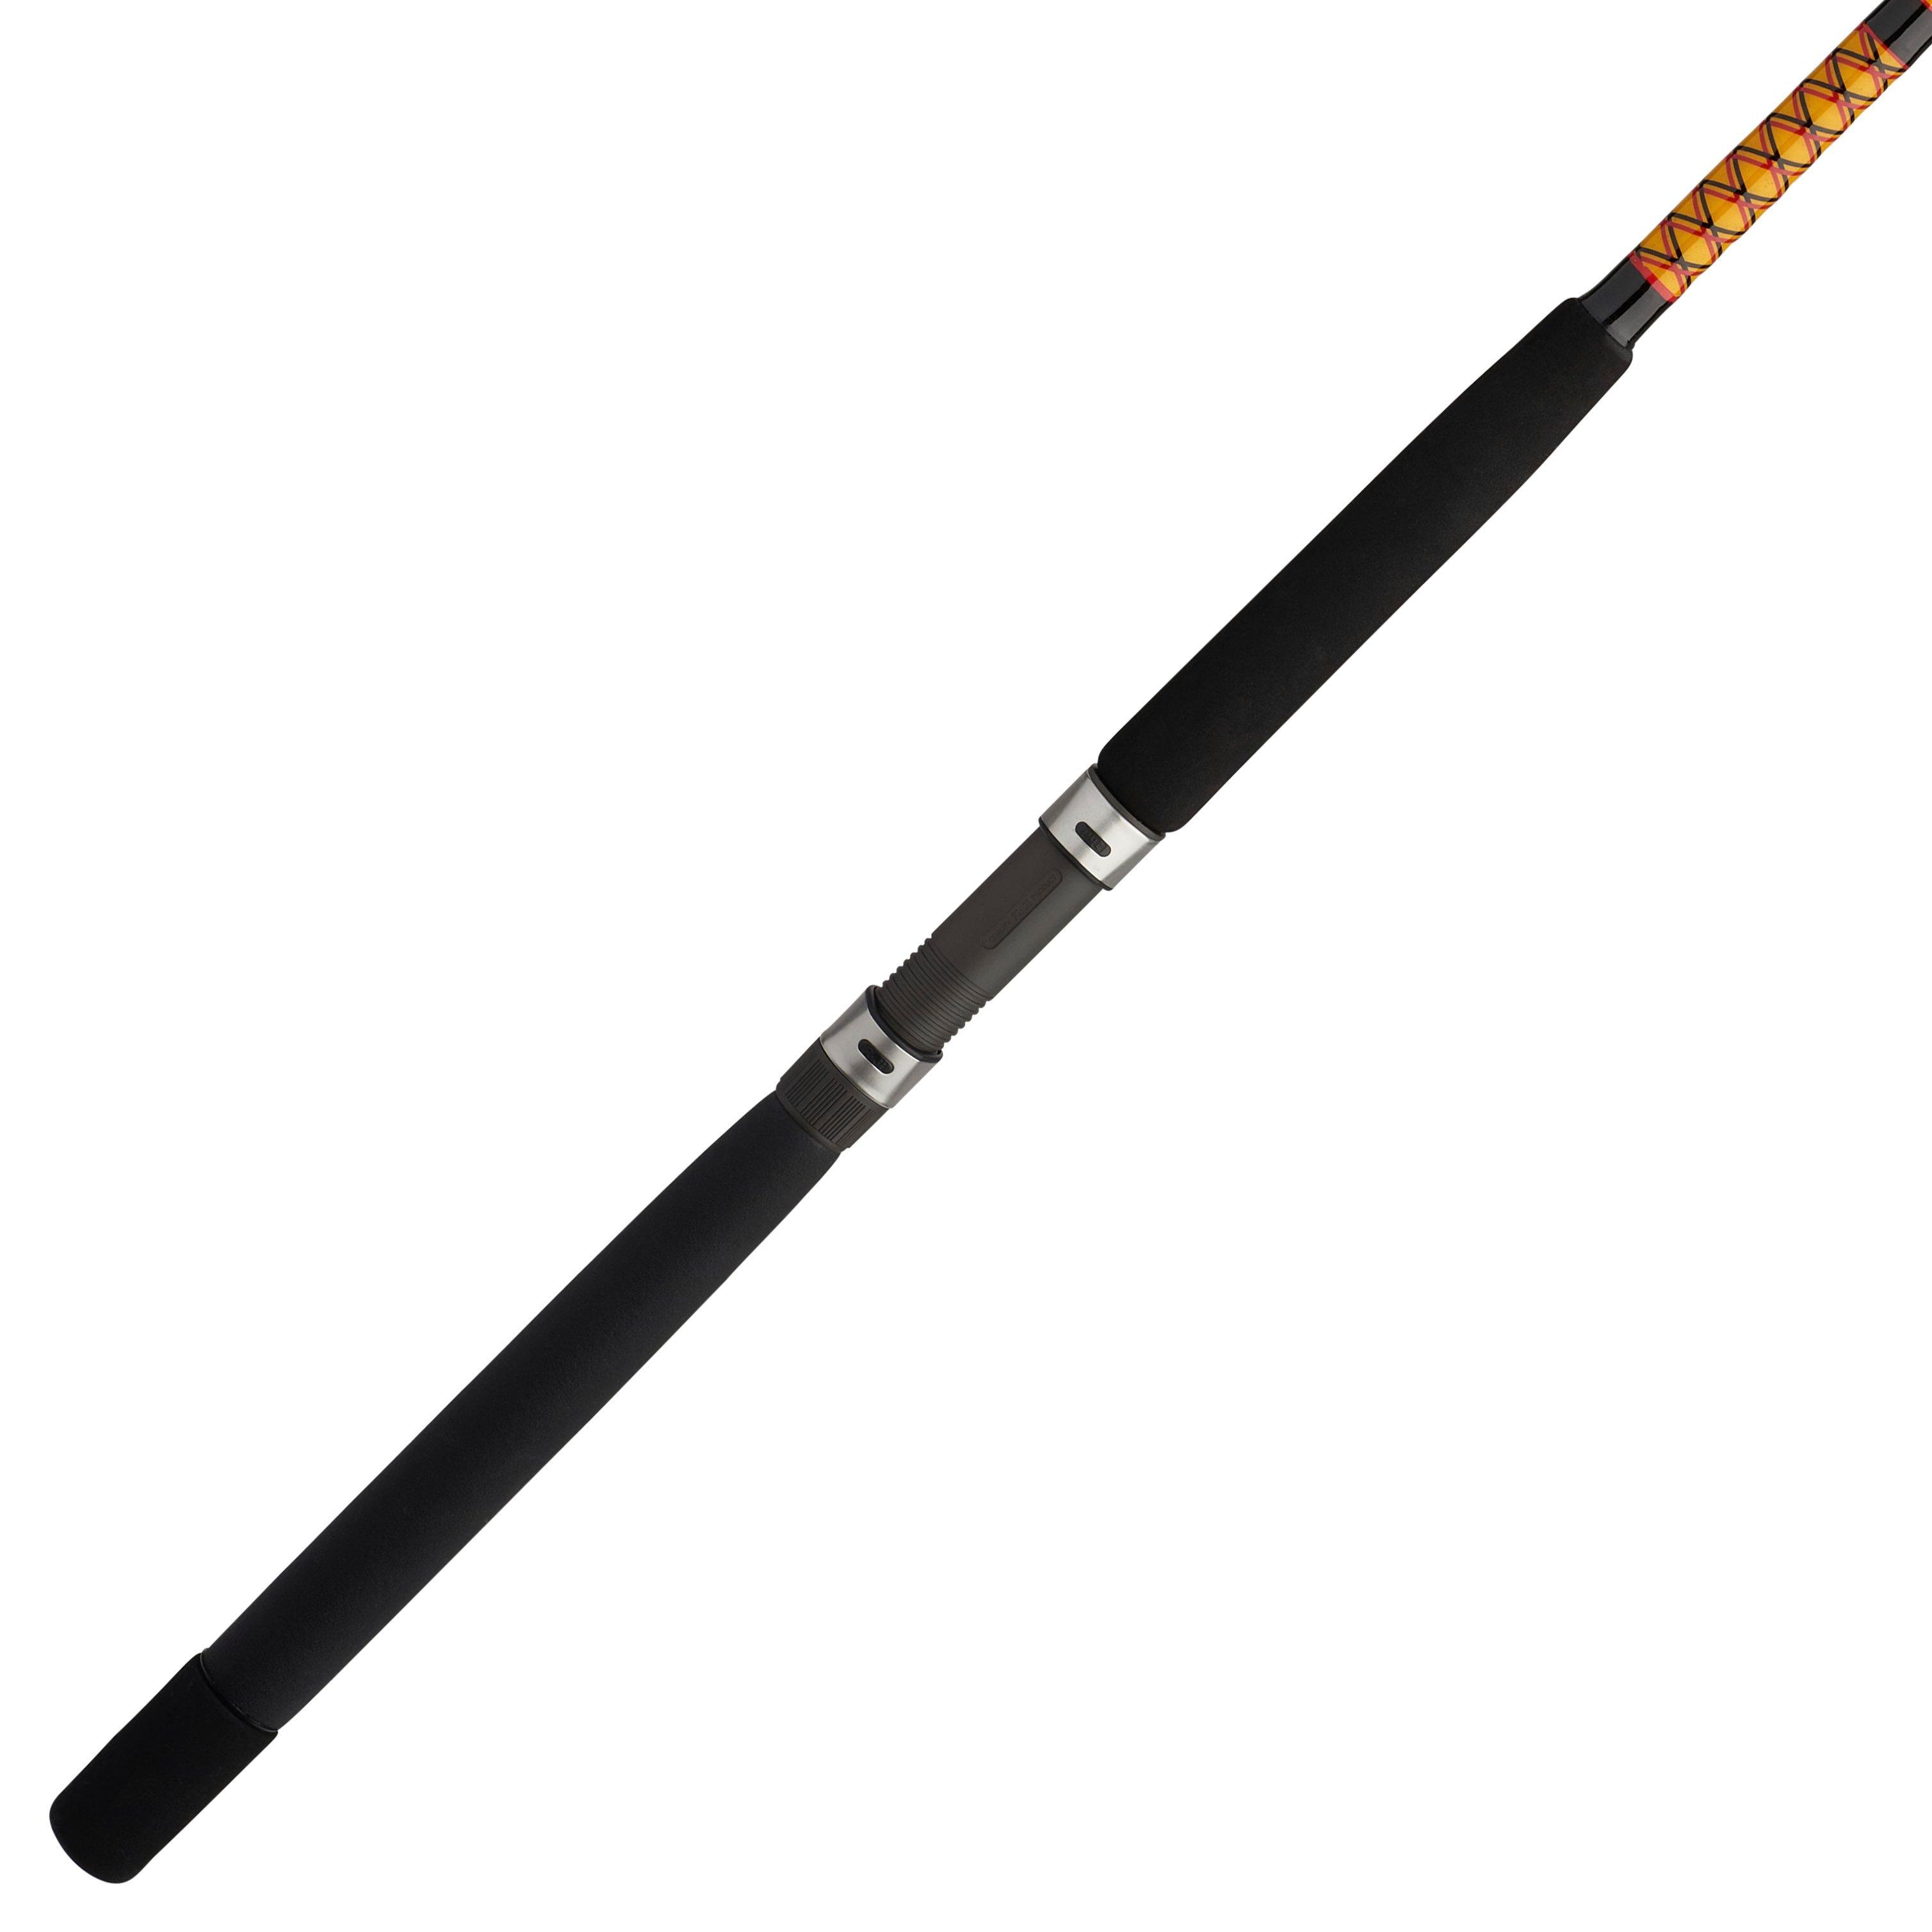 Bigwater Conventional Rod - image 1 of 8